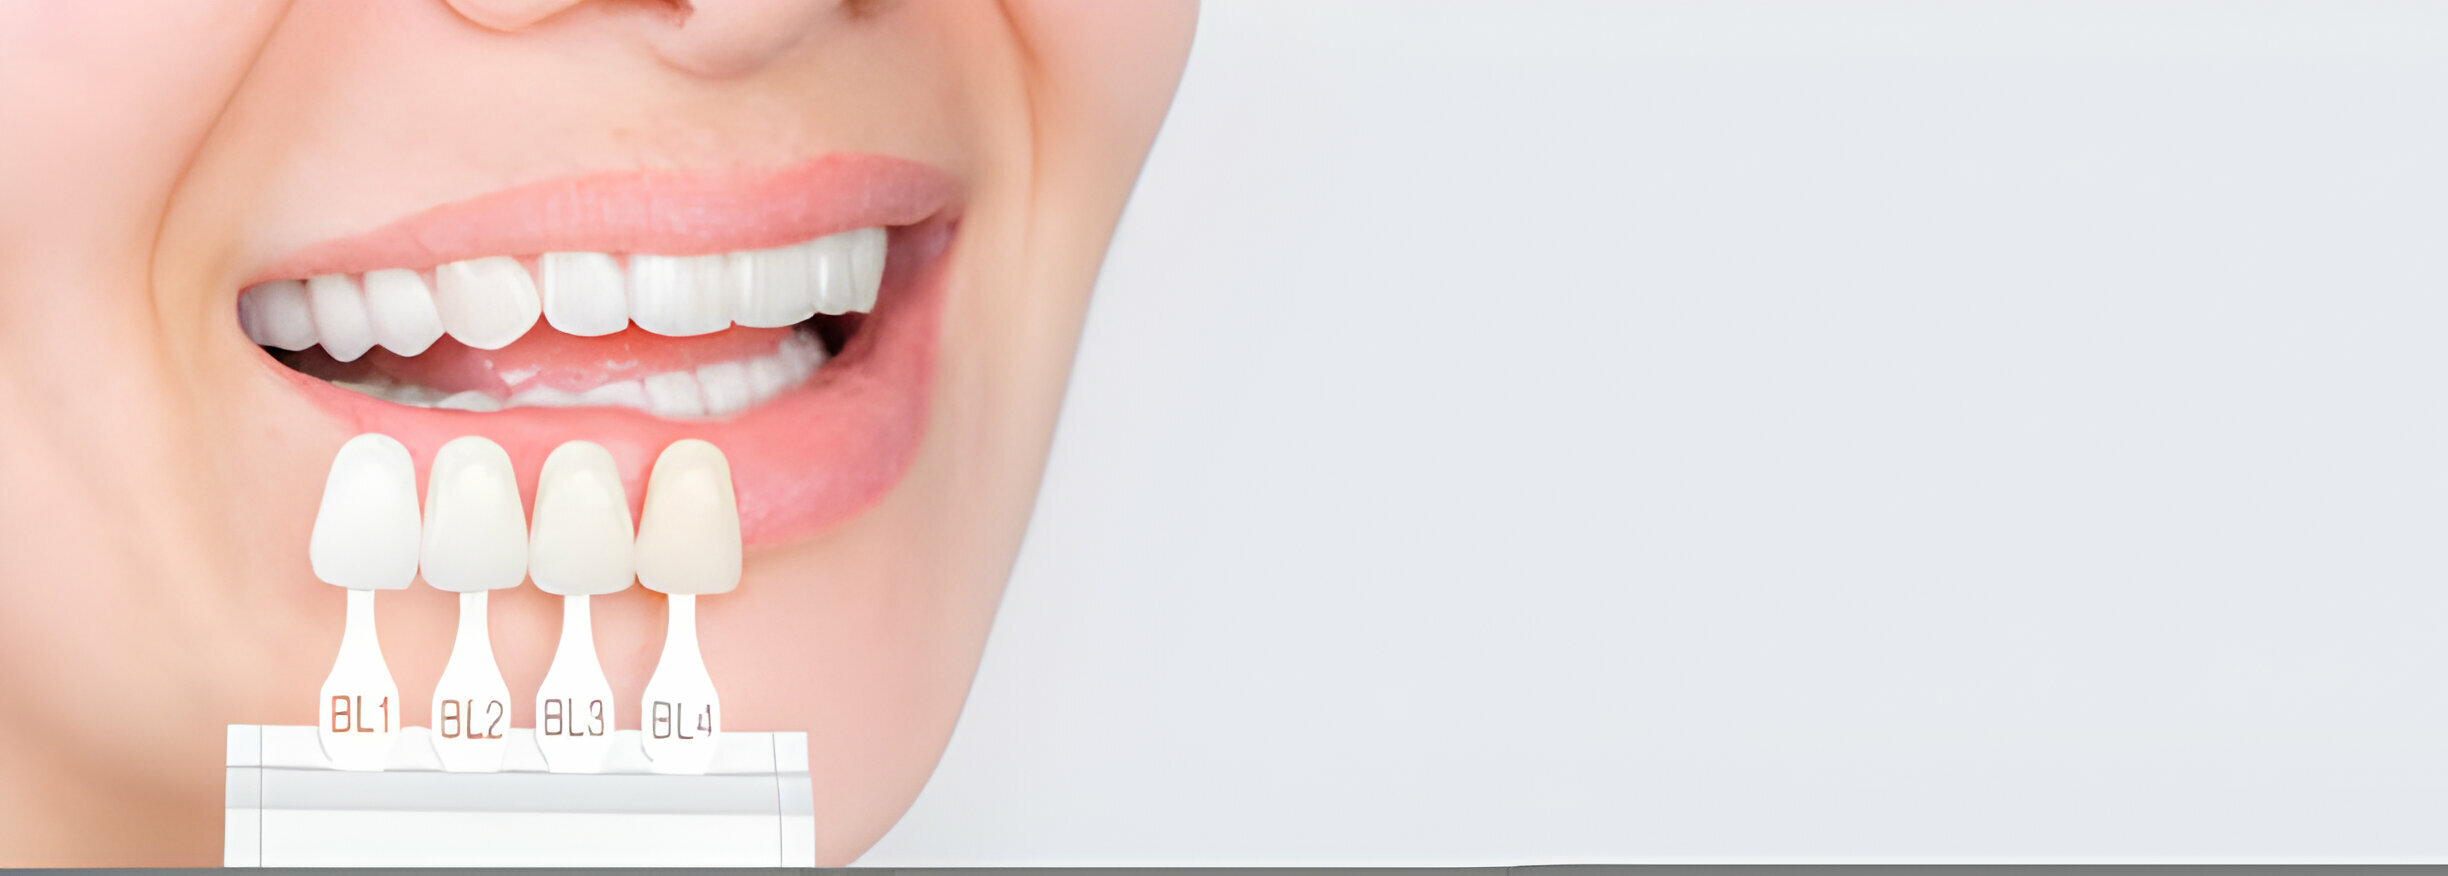 Discover the Safety and Secrets of Teeth Whitening for a Brighter, Healthier Smile_1